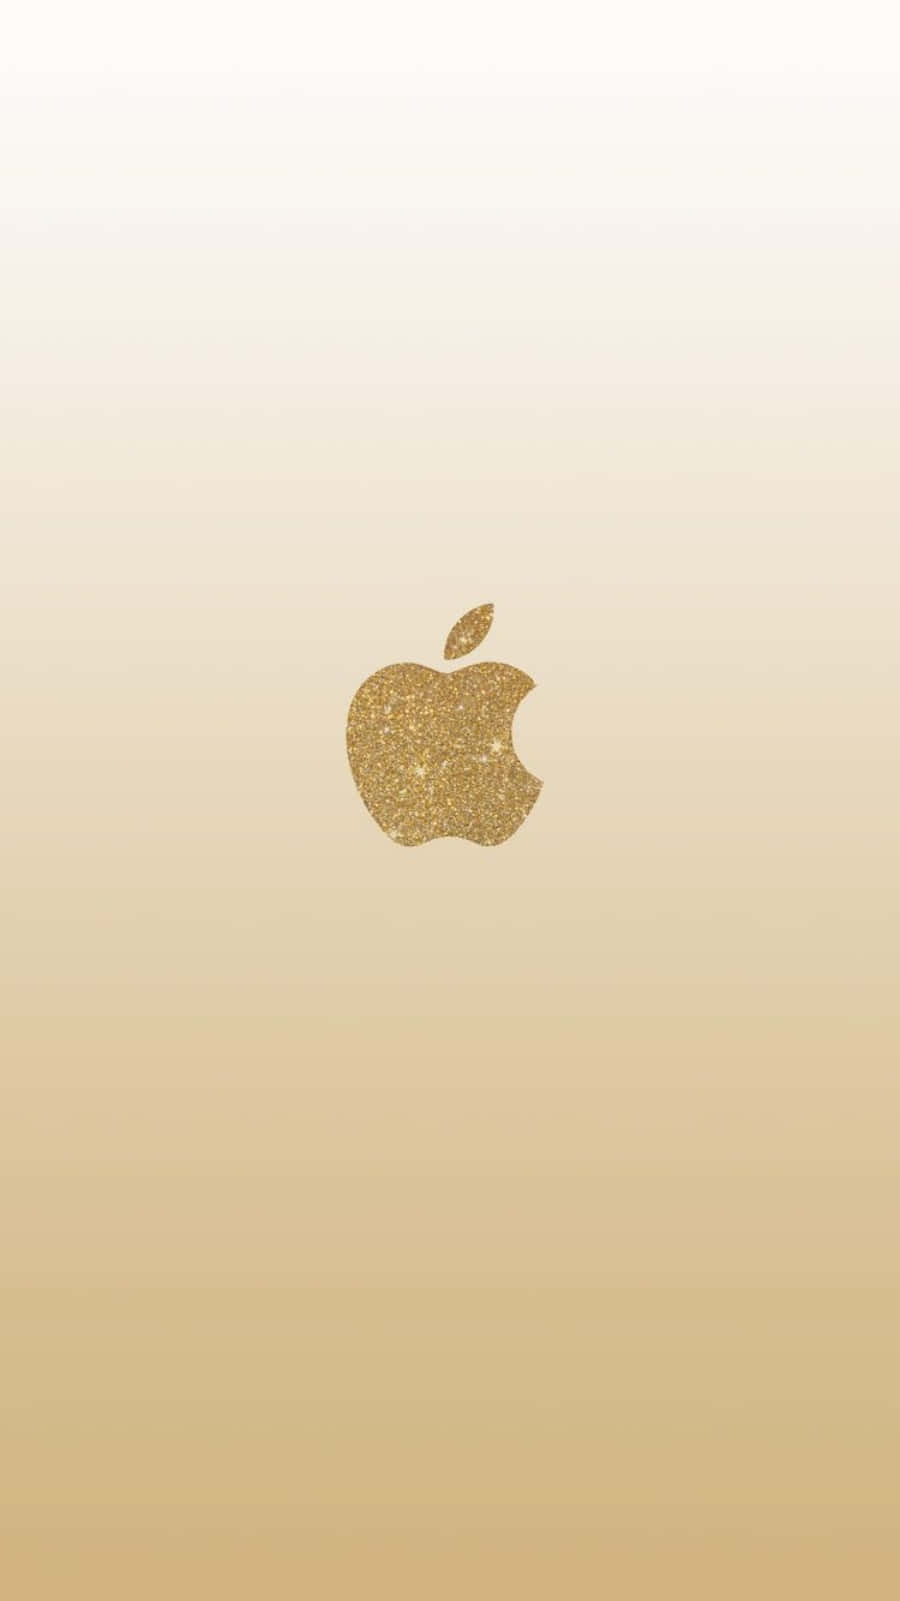 The Perfect Apple Wallpaper